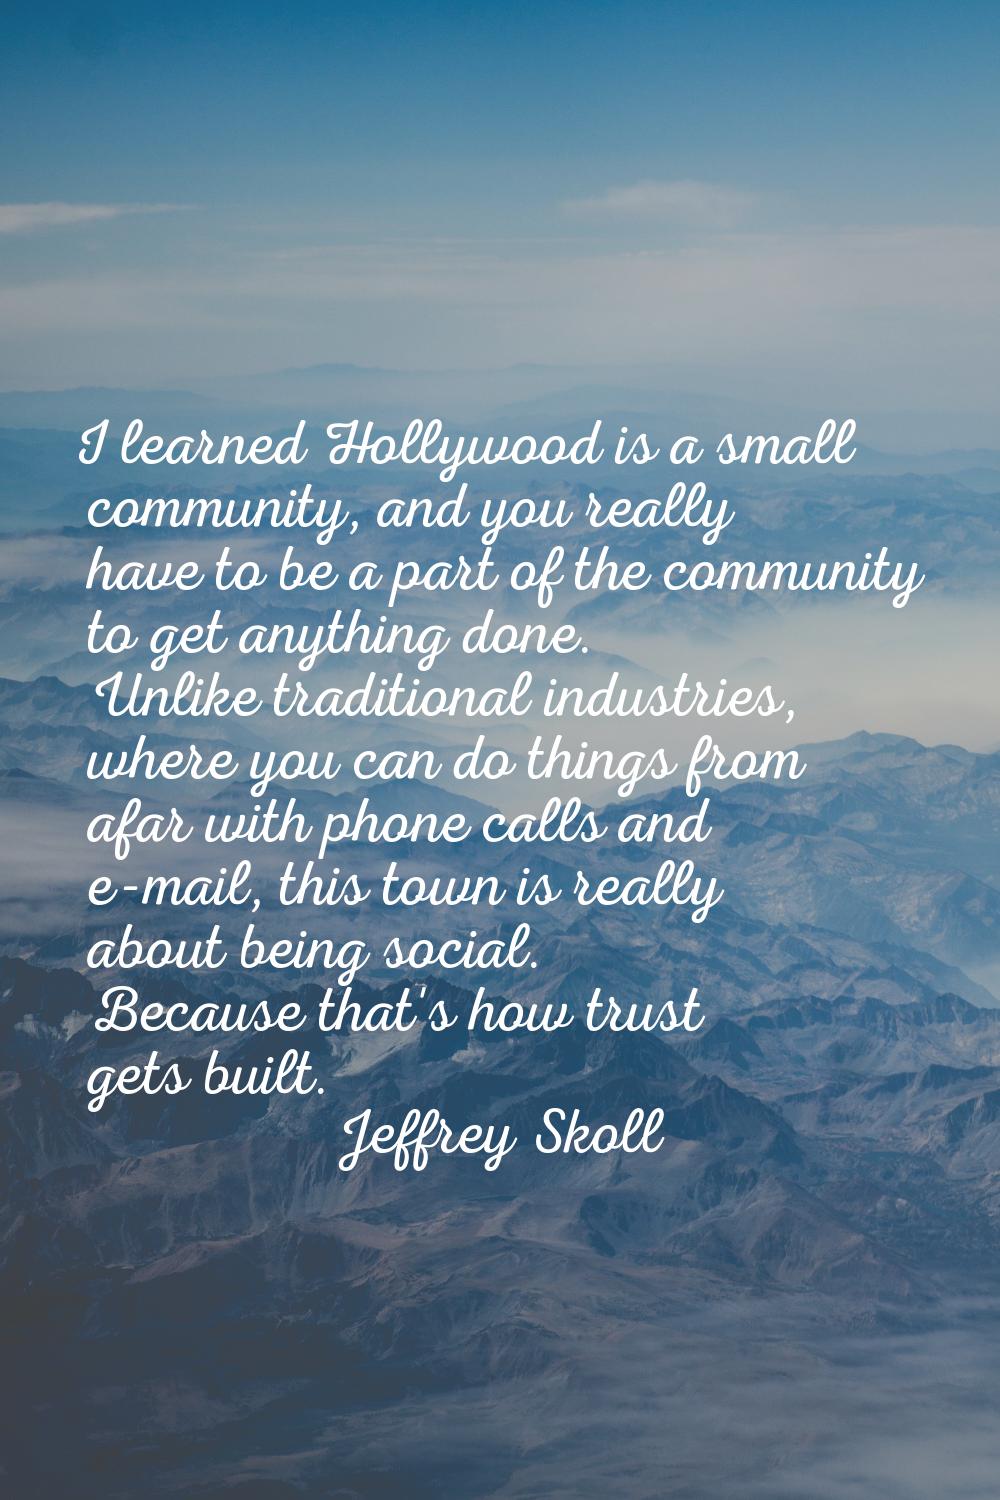 I learned Hollywood is a small community, and you really have to be a part of the community to get 